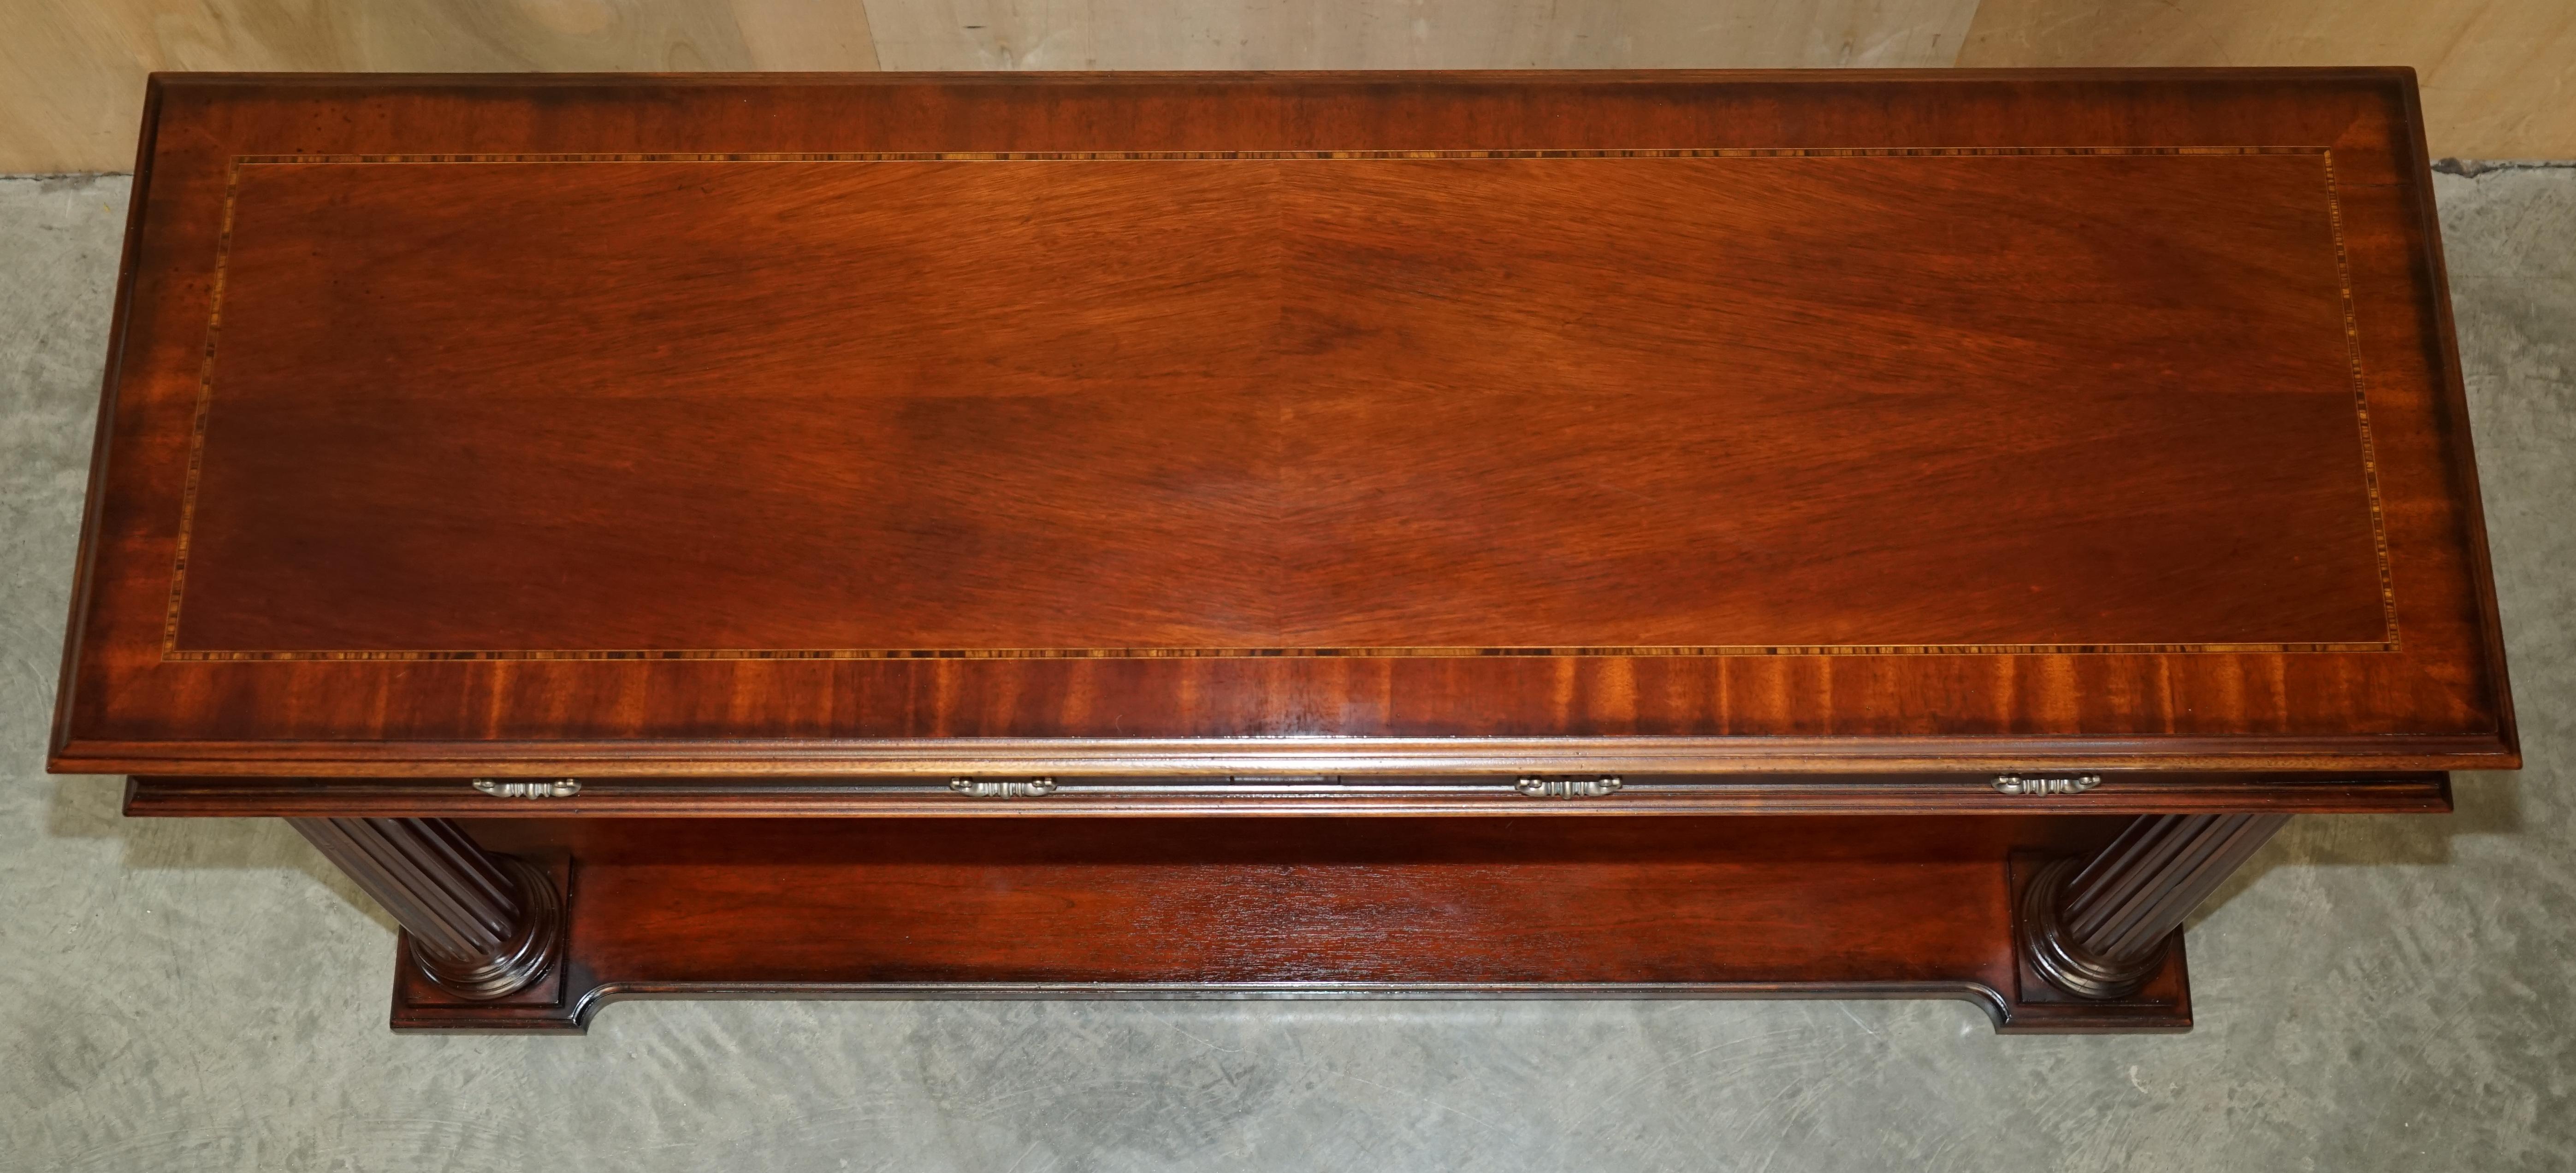 Stunning Ralph Lauren Hand Carved American Hardwood Console Table Sideboard For Sale 7